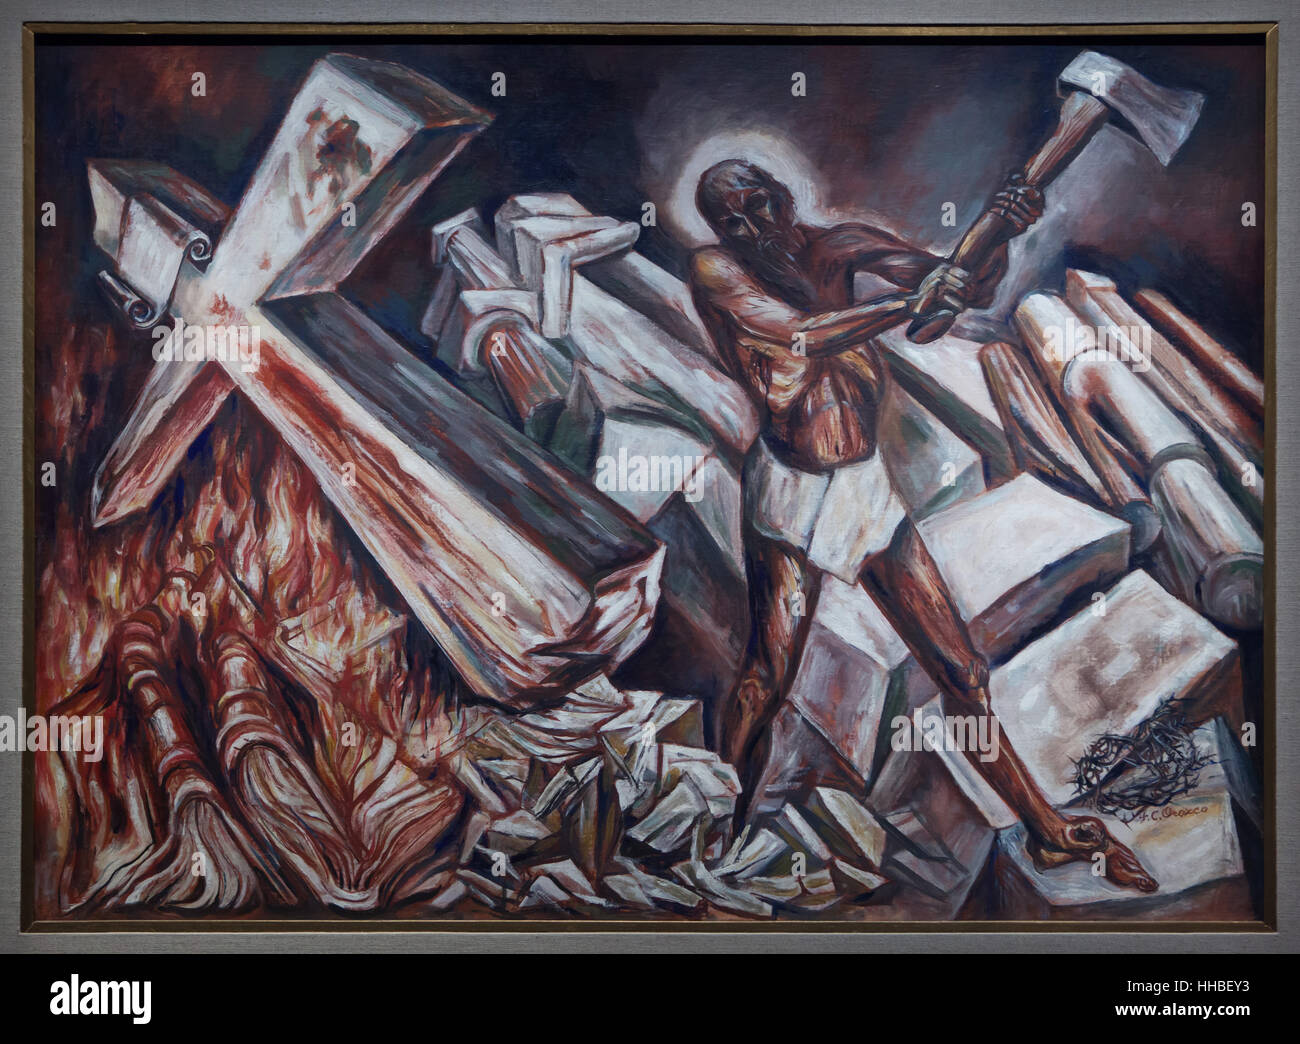 Paining Christ Destroying His Cross (1943) by Mexican painter Jose Clemente Orozco displayed at the exhibition devoted to Mexican art from 1900 to 1950 in Grand Palais in Paris, France. The painting from the collection of the Museo de Arte Carrillo Gil in Mexico City is one of the highlights of the exhibition. The exhibition runs in the till 23 January 2017. Stock Photo